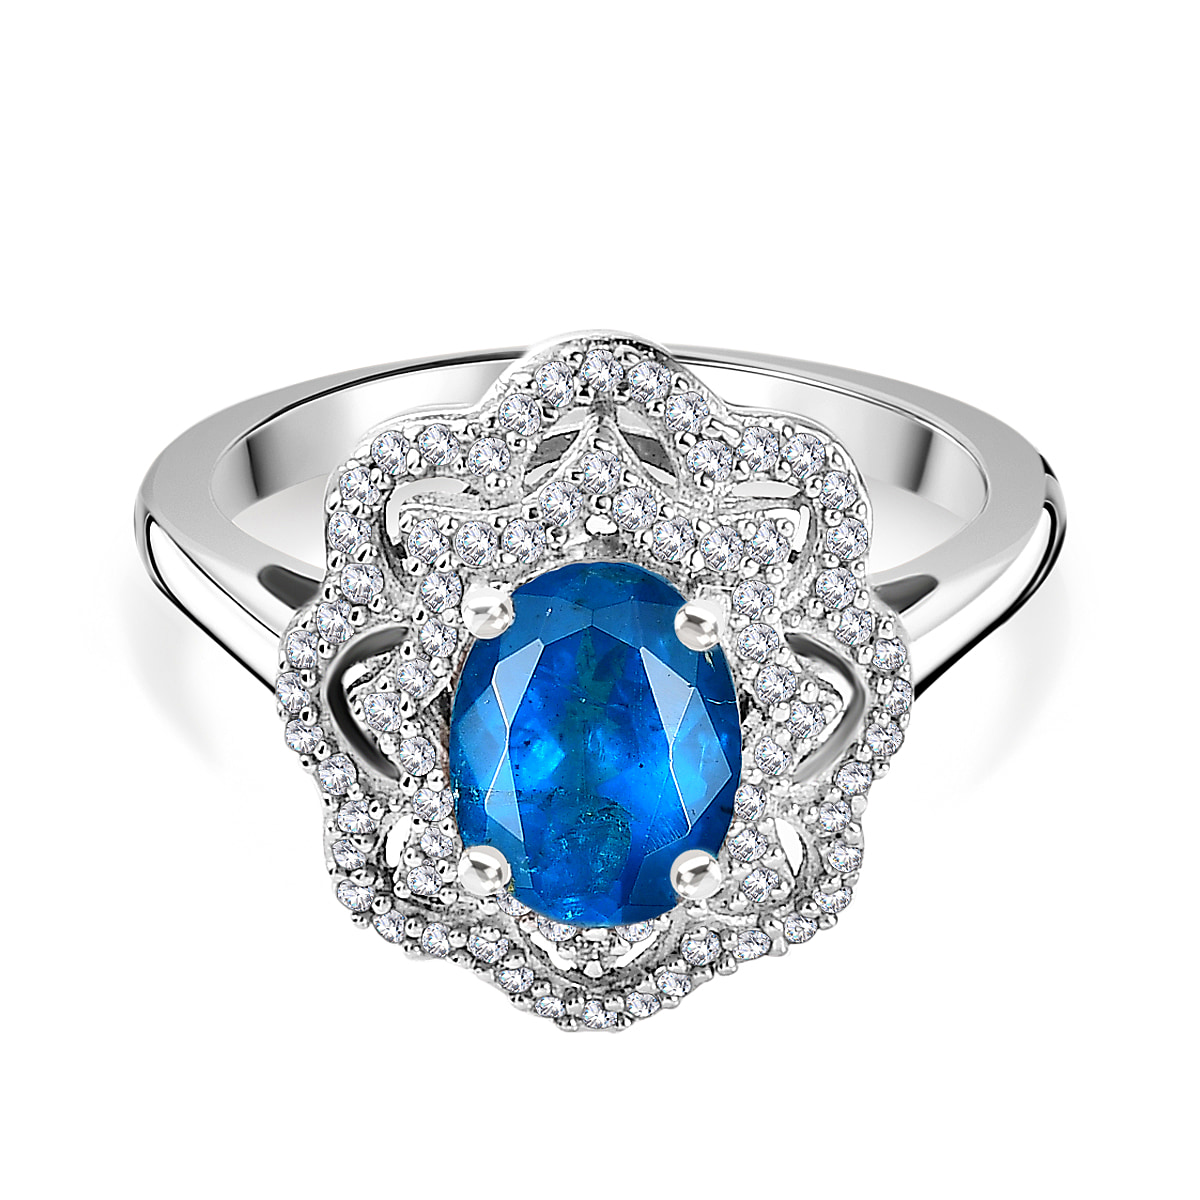 THE NEON QUEEN - Neon Apatite & Natural Zircon Ring in Platinum Overlay Sterling Silver  1.67 Ct